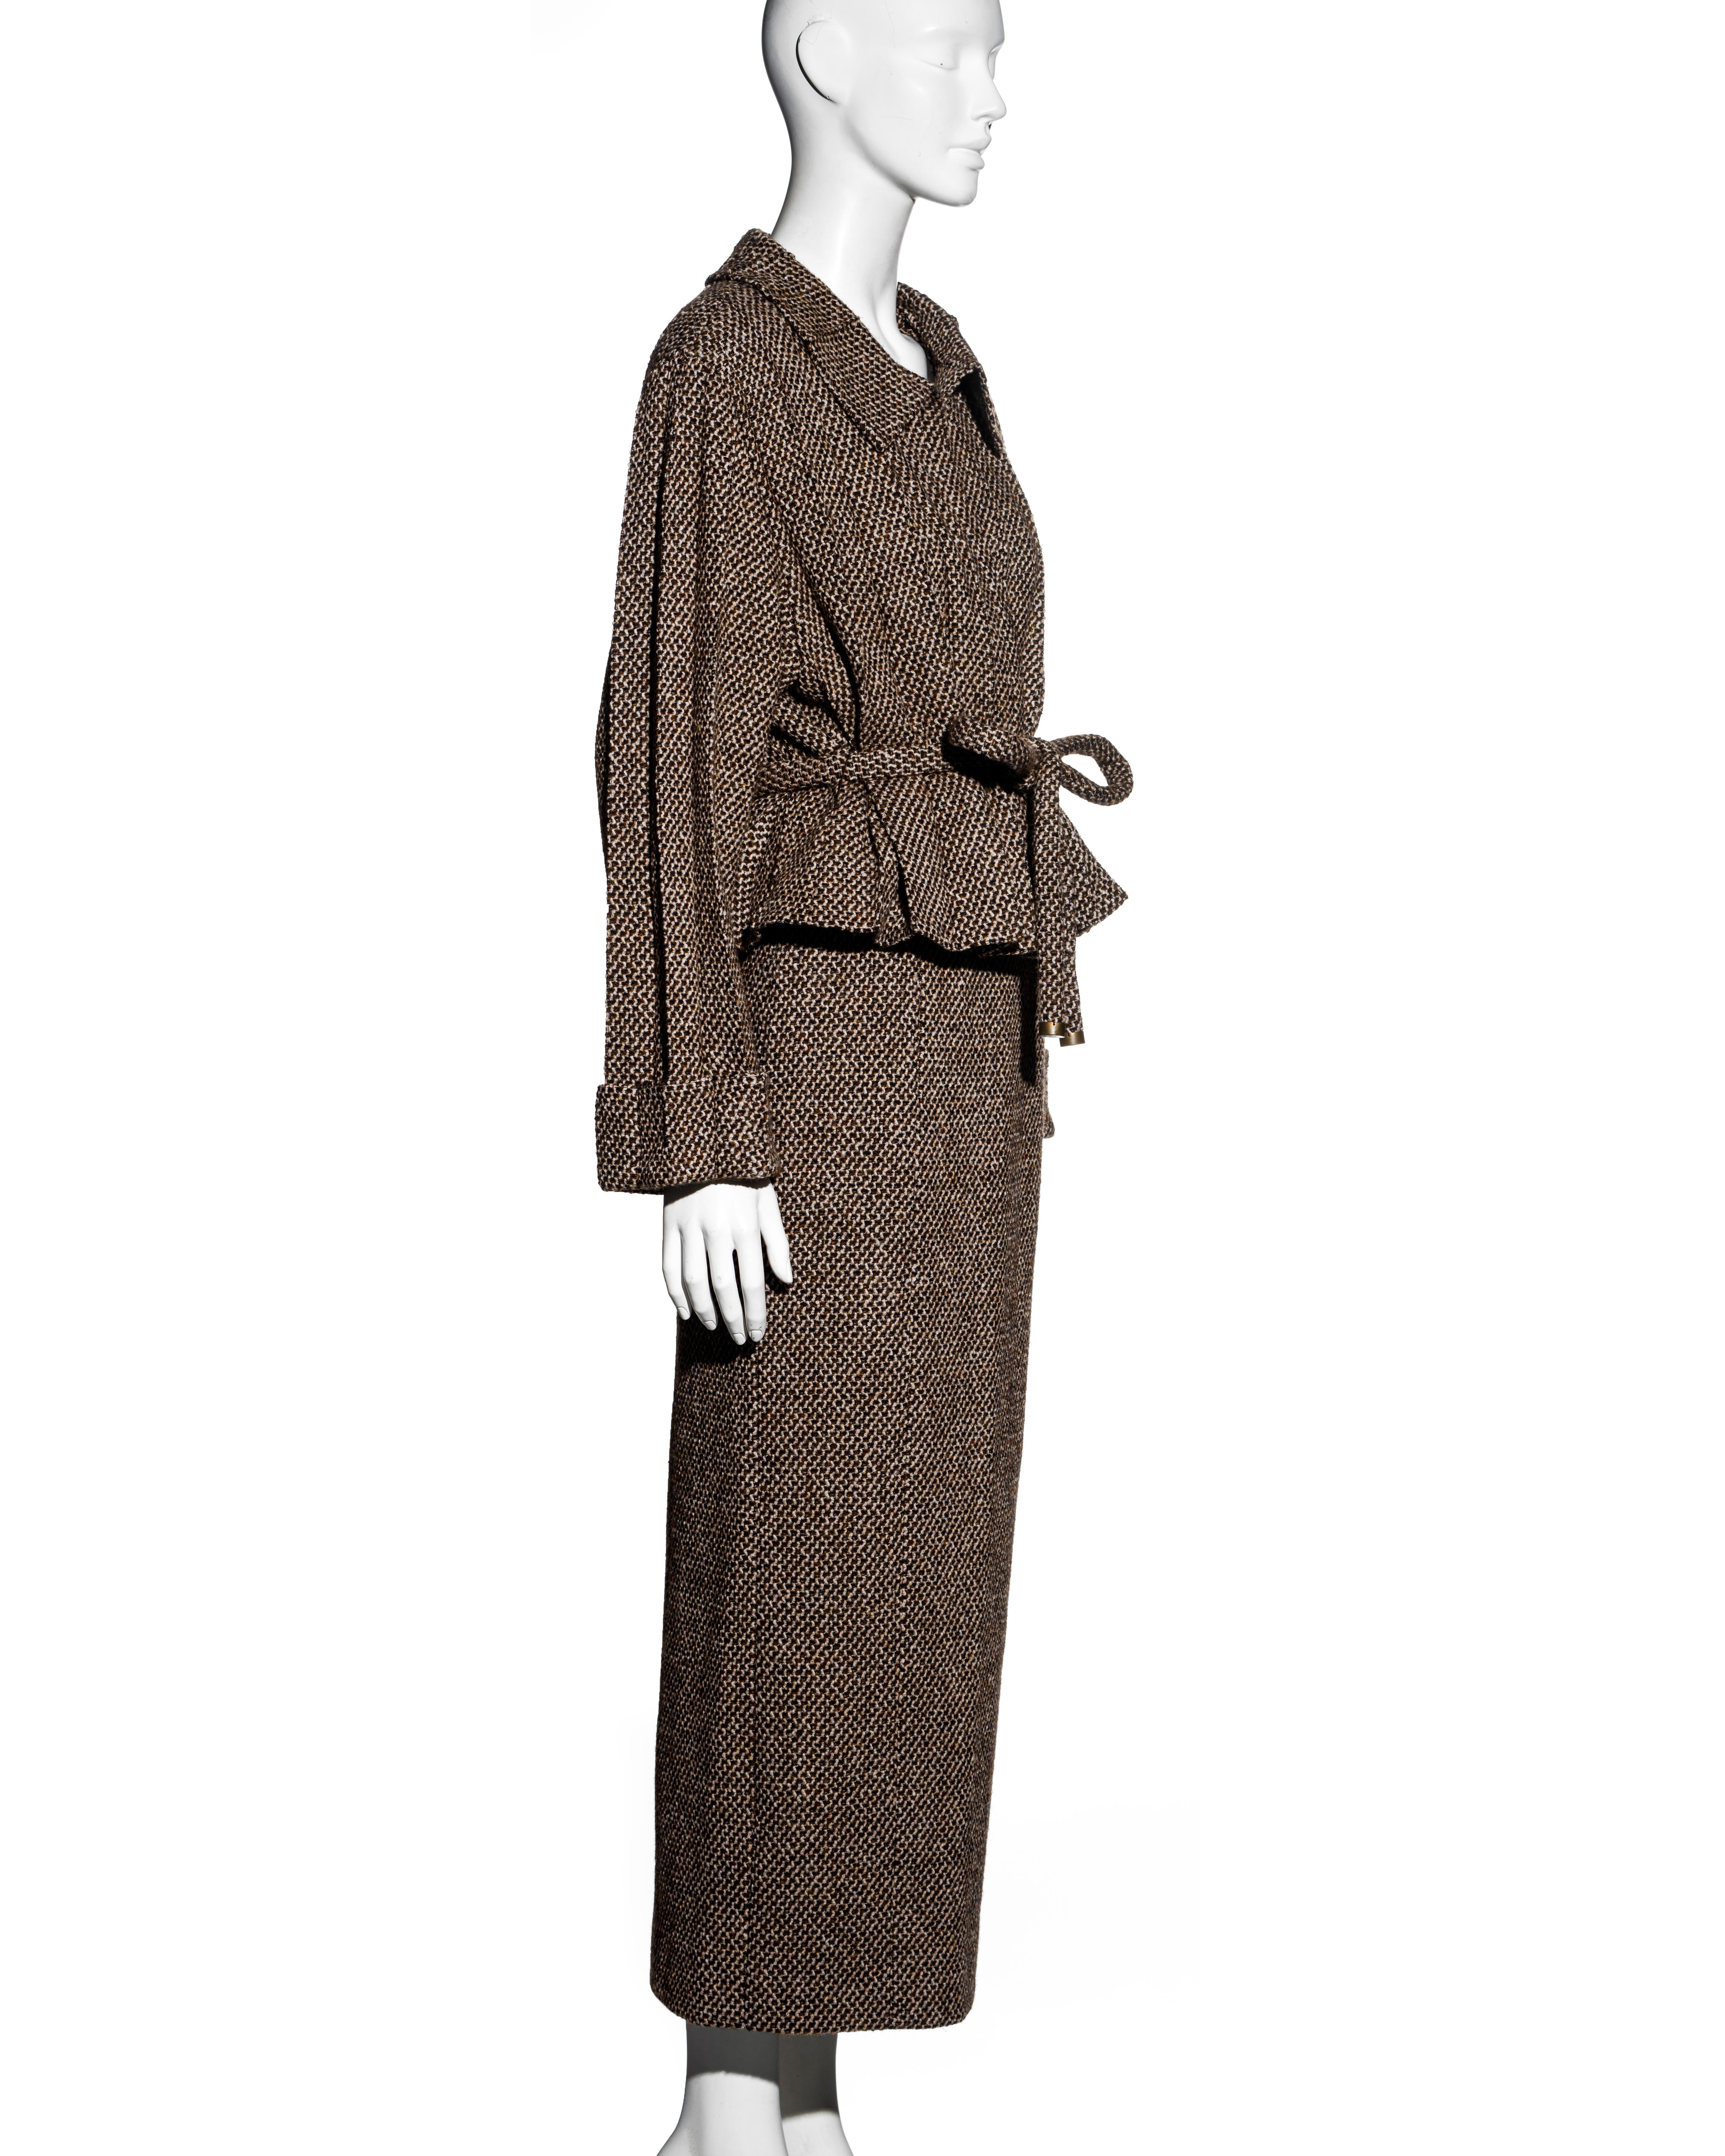 Chanel by Karl Lagerfeld brown tweed pleated jacket maxi skirt suit, fw 1998 In Excellent Condition For Sale In London, GB